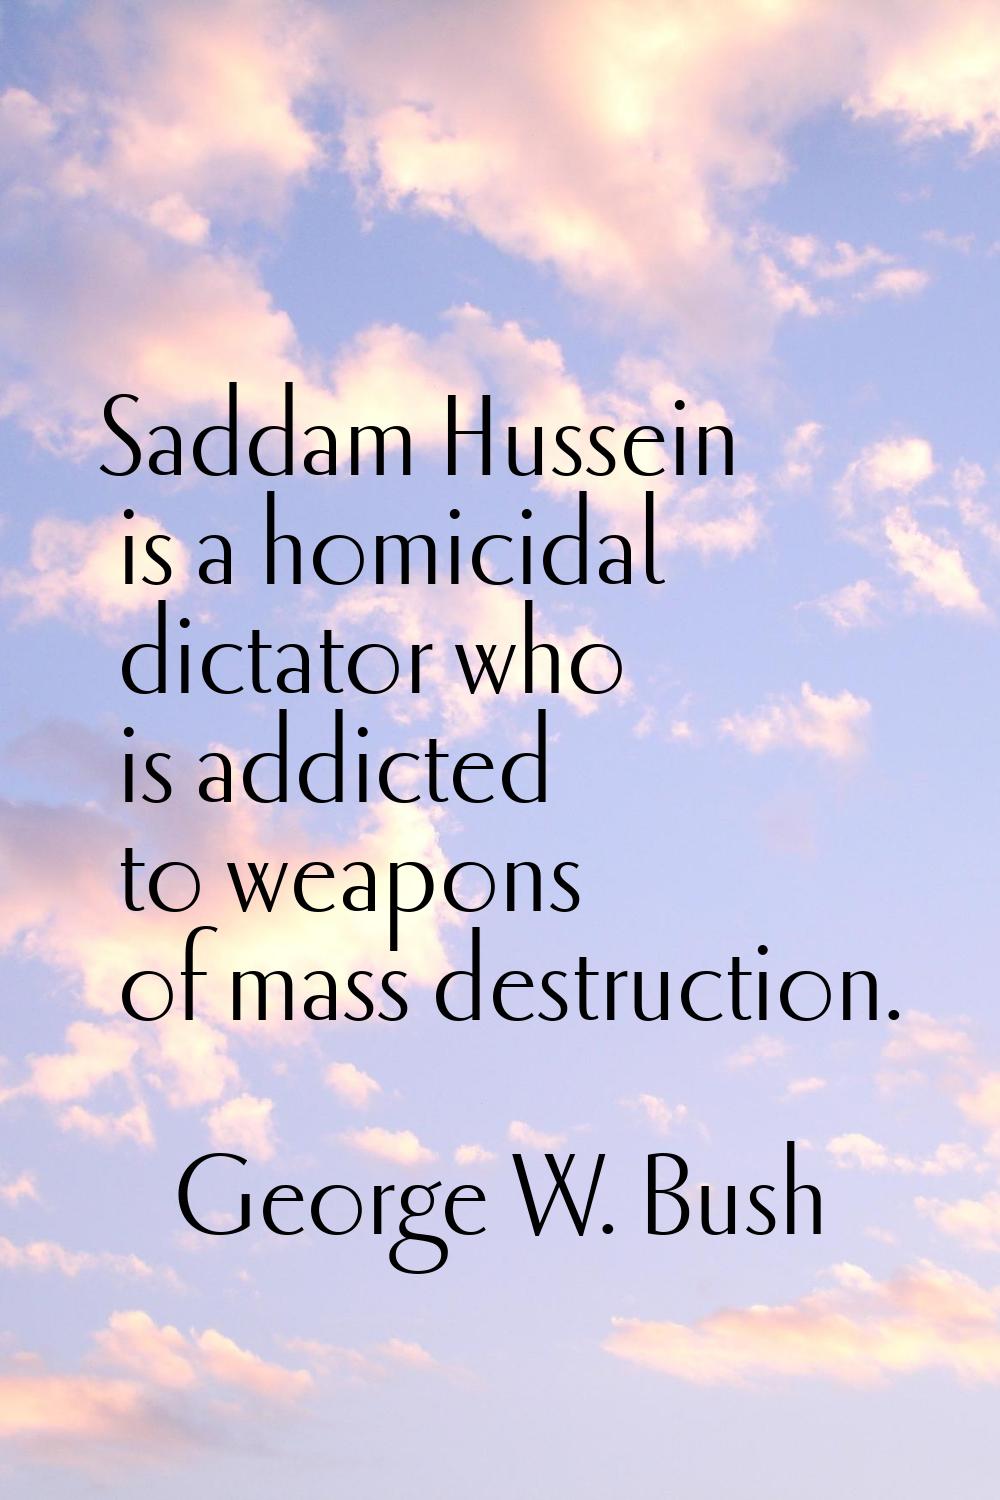 Saddam Hussein is a homicidal dictator who is addicted to weapons of mass destruction.